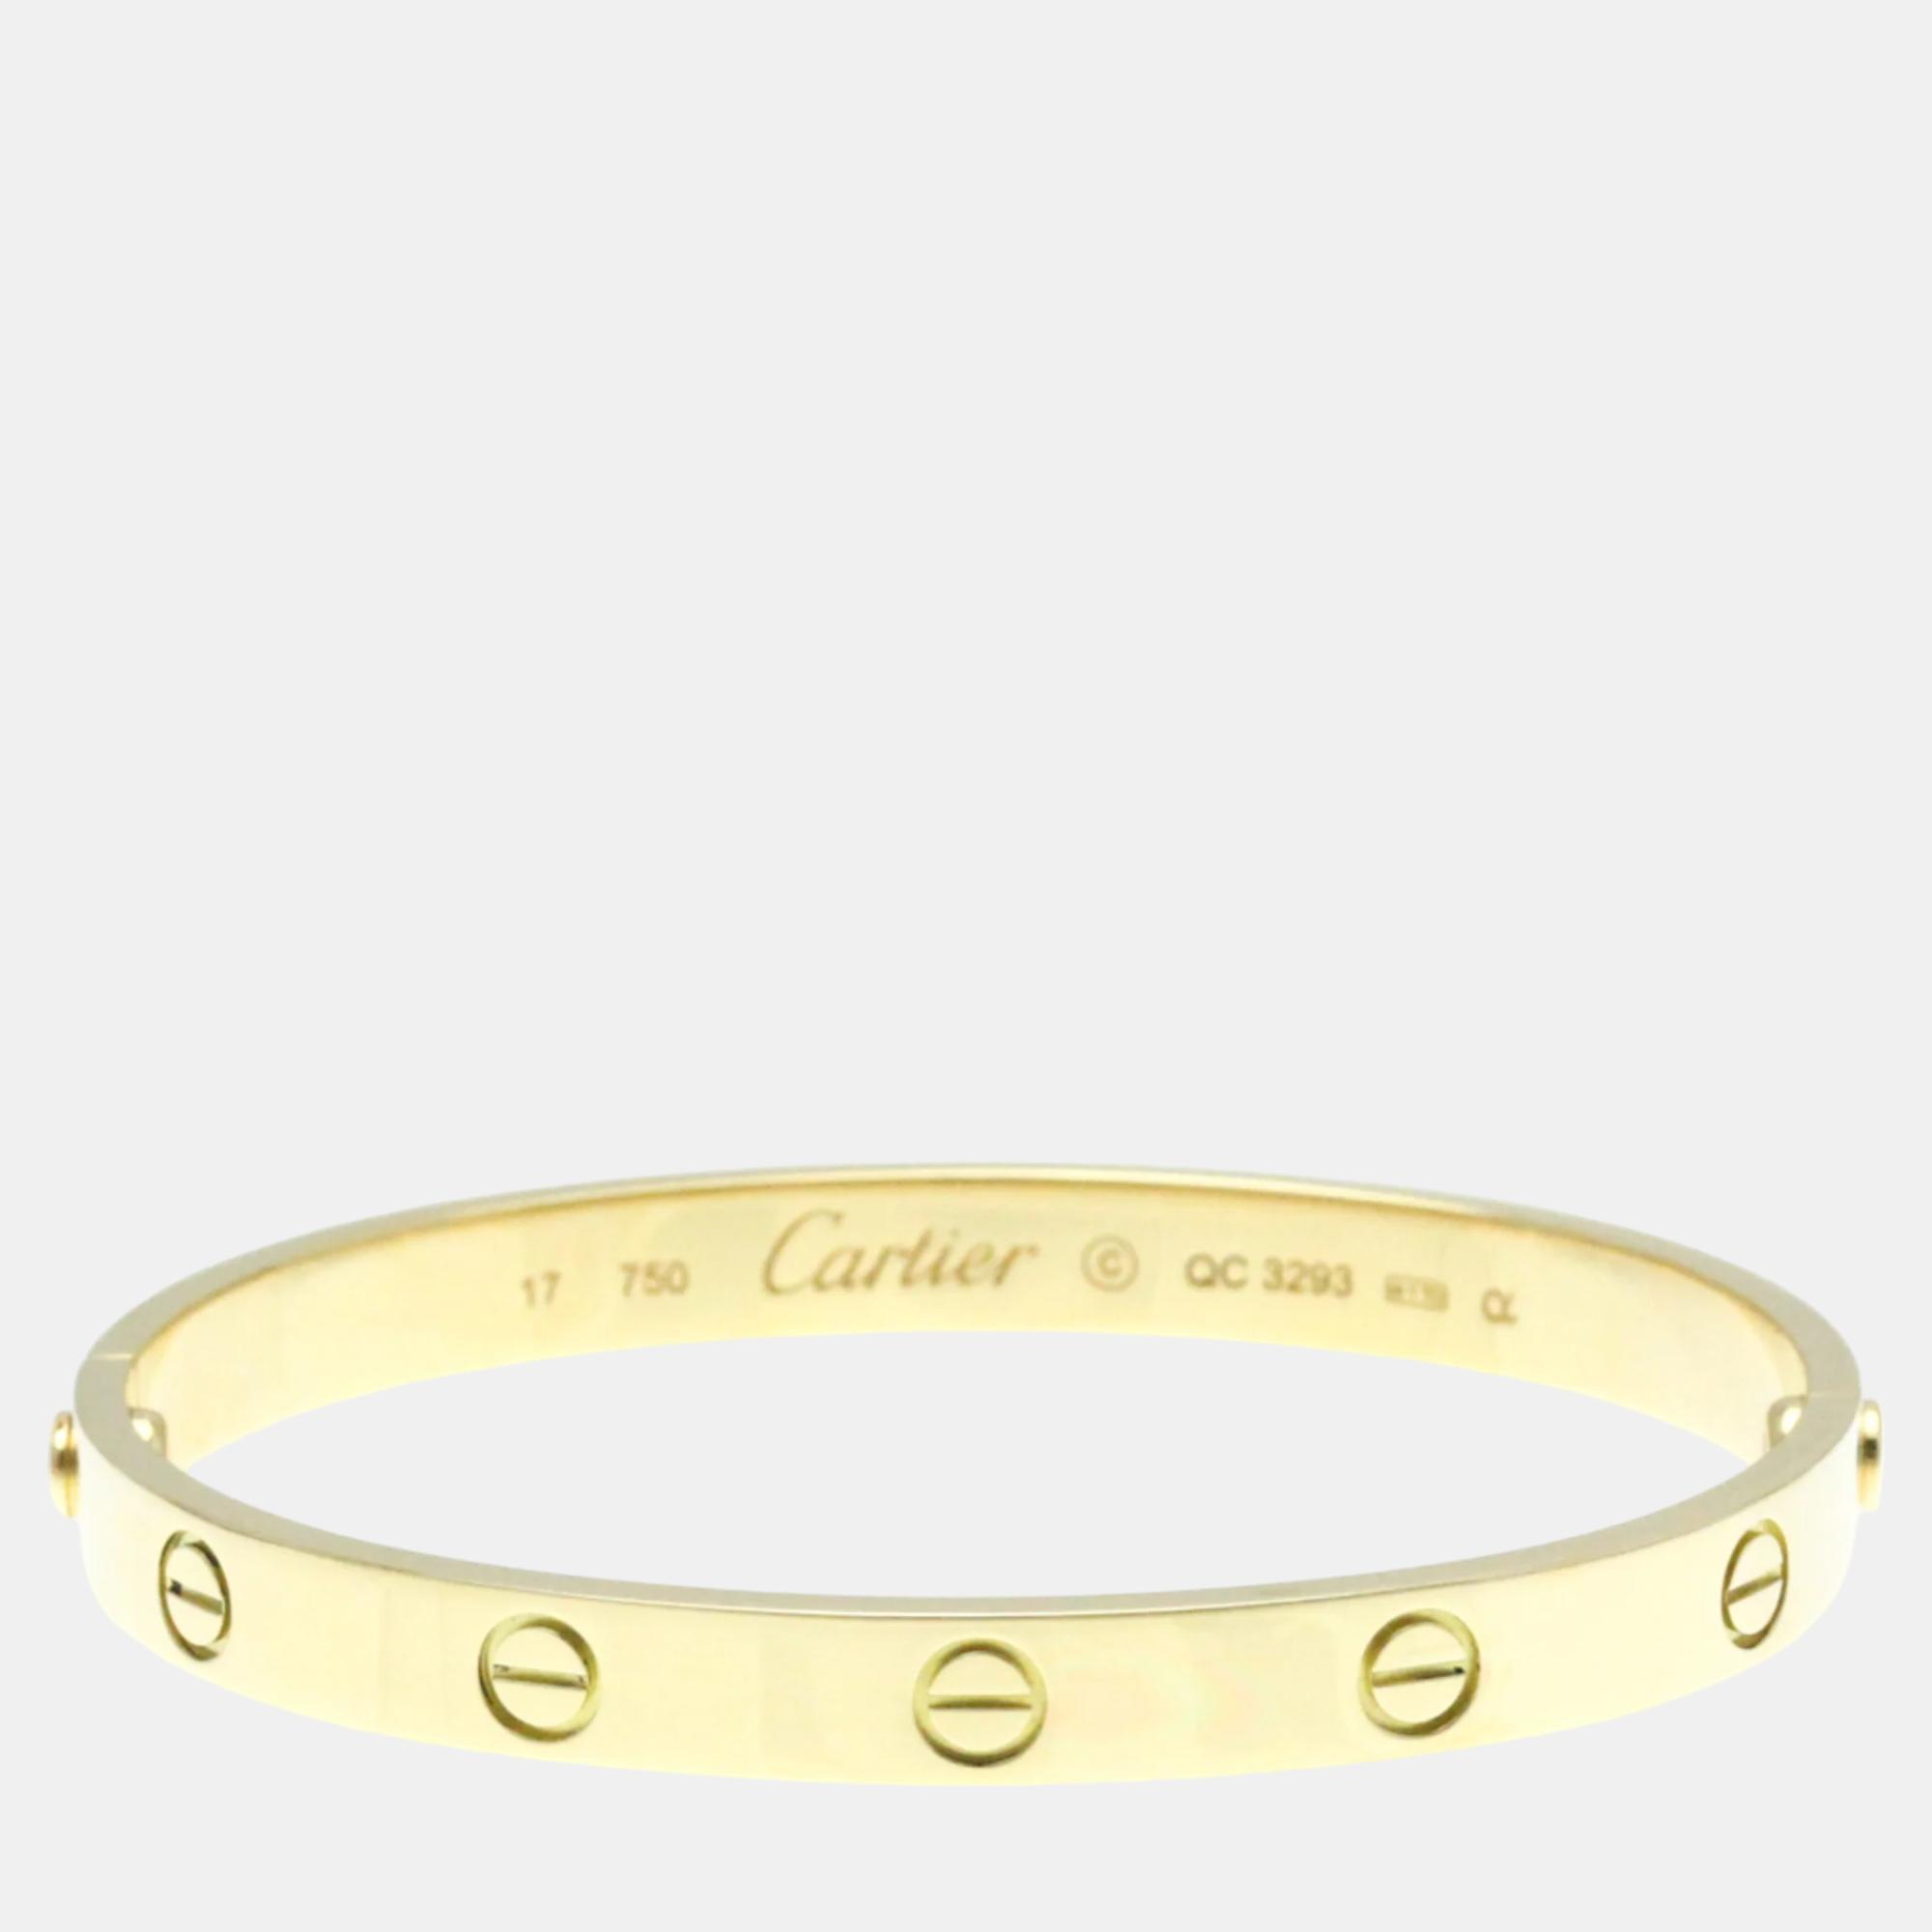 Elevate your wrist with this Cartier womens bracelet. Meticulously crafted it exudes elegance and luxury with premium materials exquisite detailing and a timeless design making it the perfect statement piece.